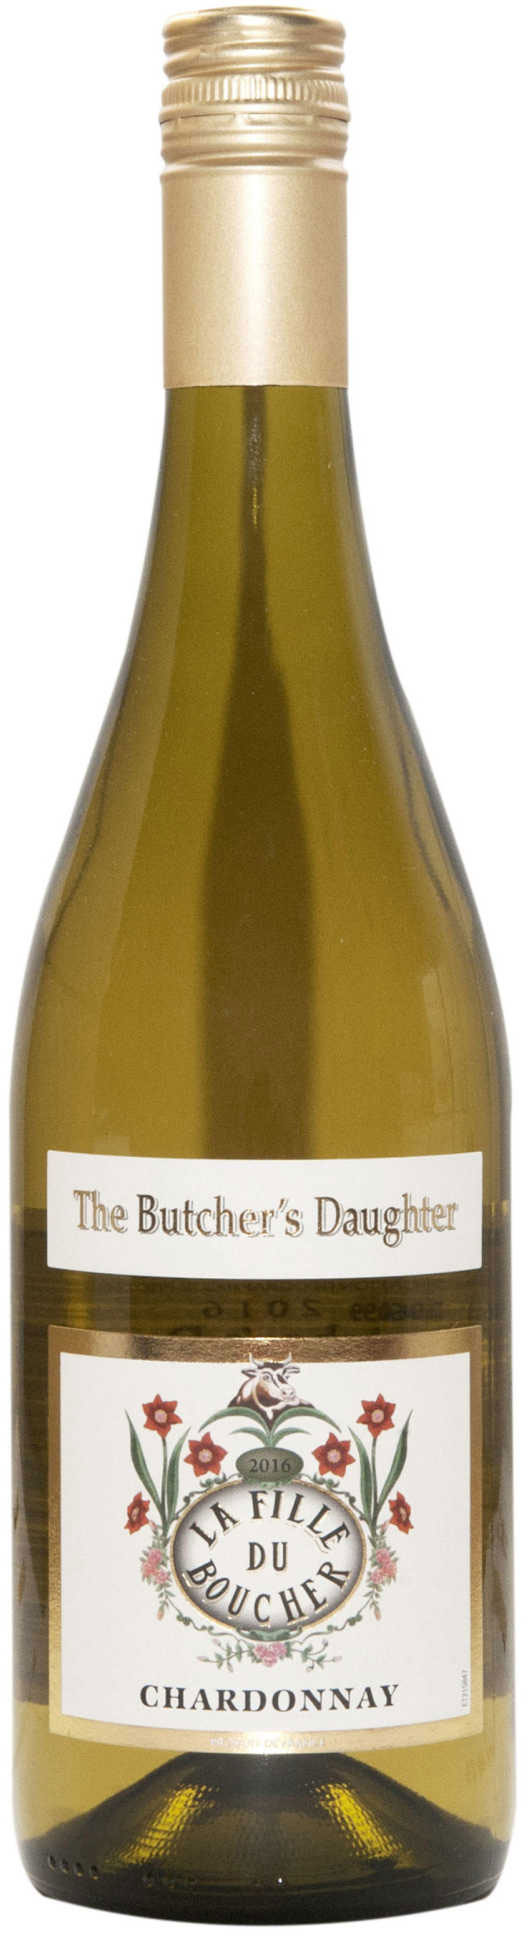 The Butcher's Daughter Chardonnay 2020